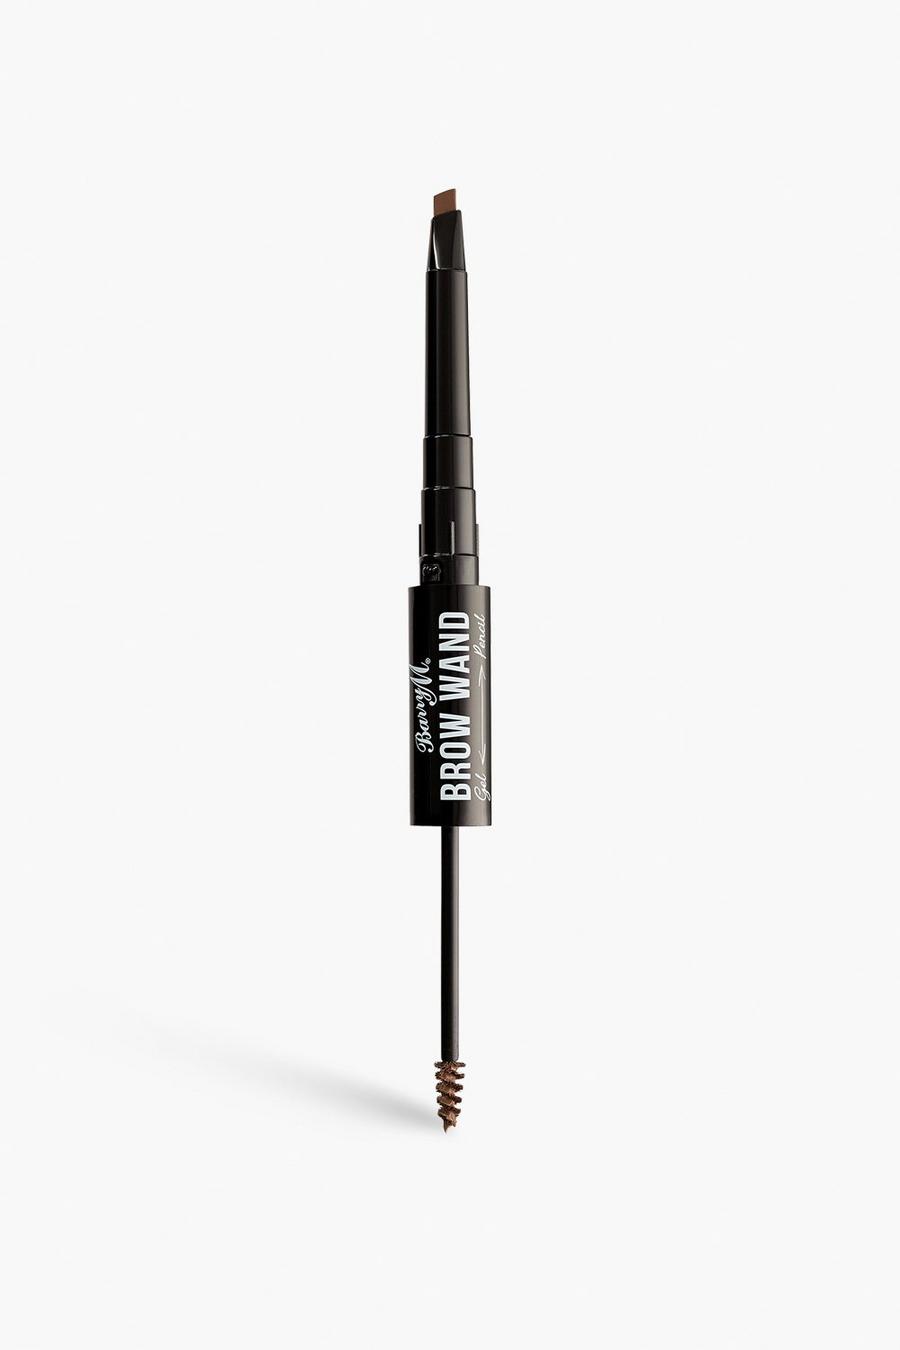 Brown Barry M Brow Wand - Medium image number 1